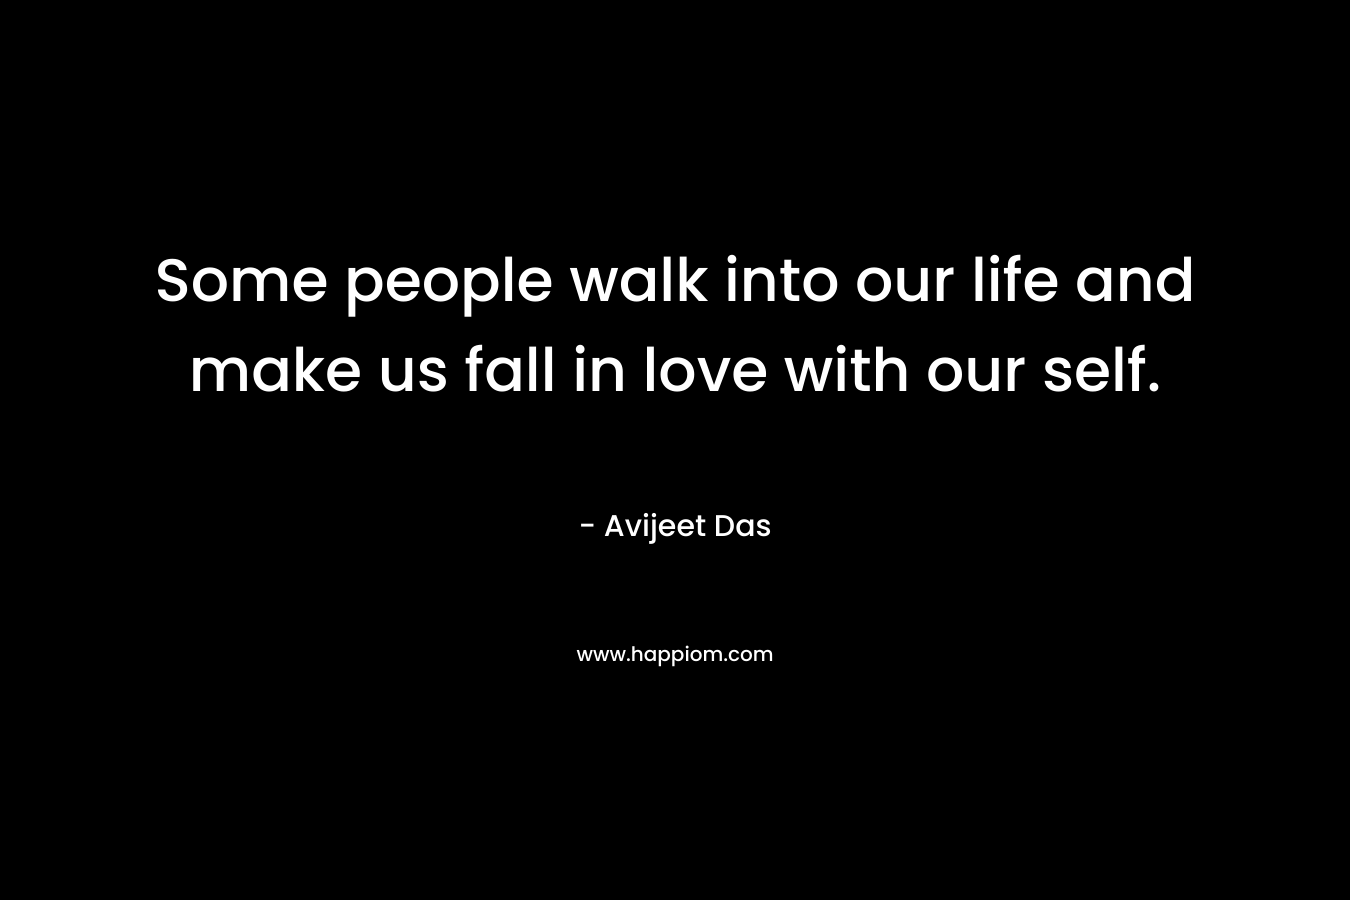 Some people walk into our life and make us fall in love with our self.